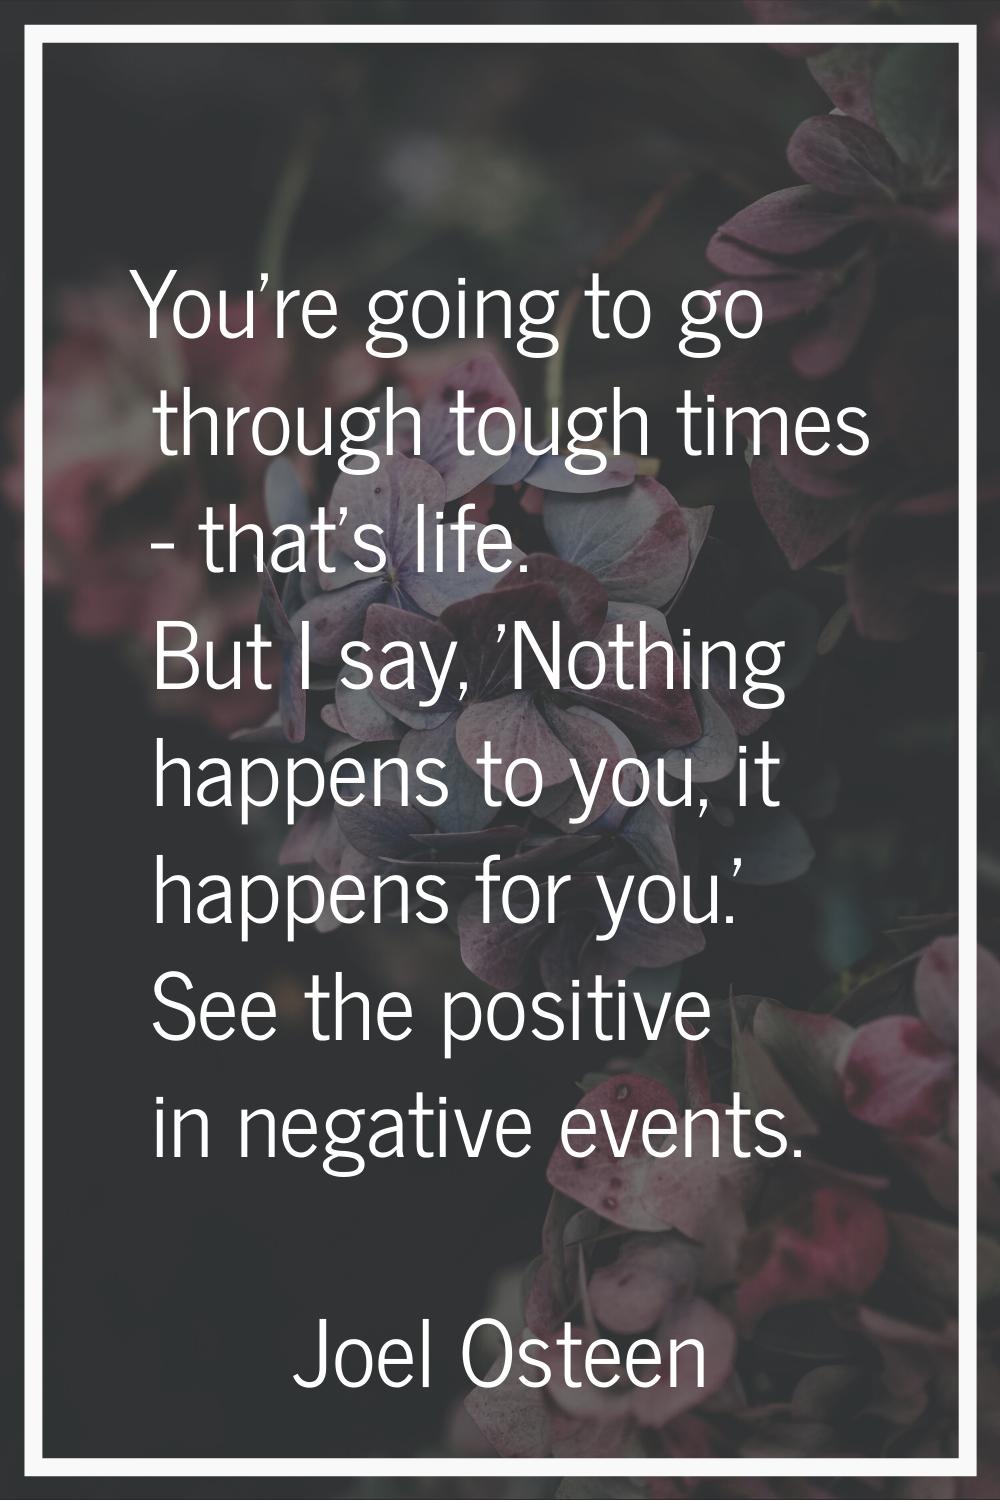 You're going to go through tough times - that's life. But I say, 'Nothing happens to you, it happen